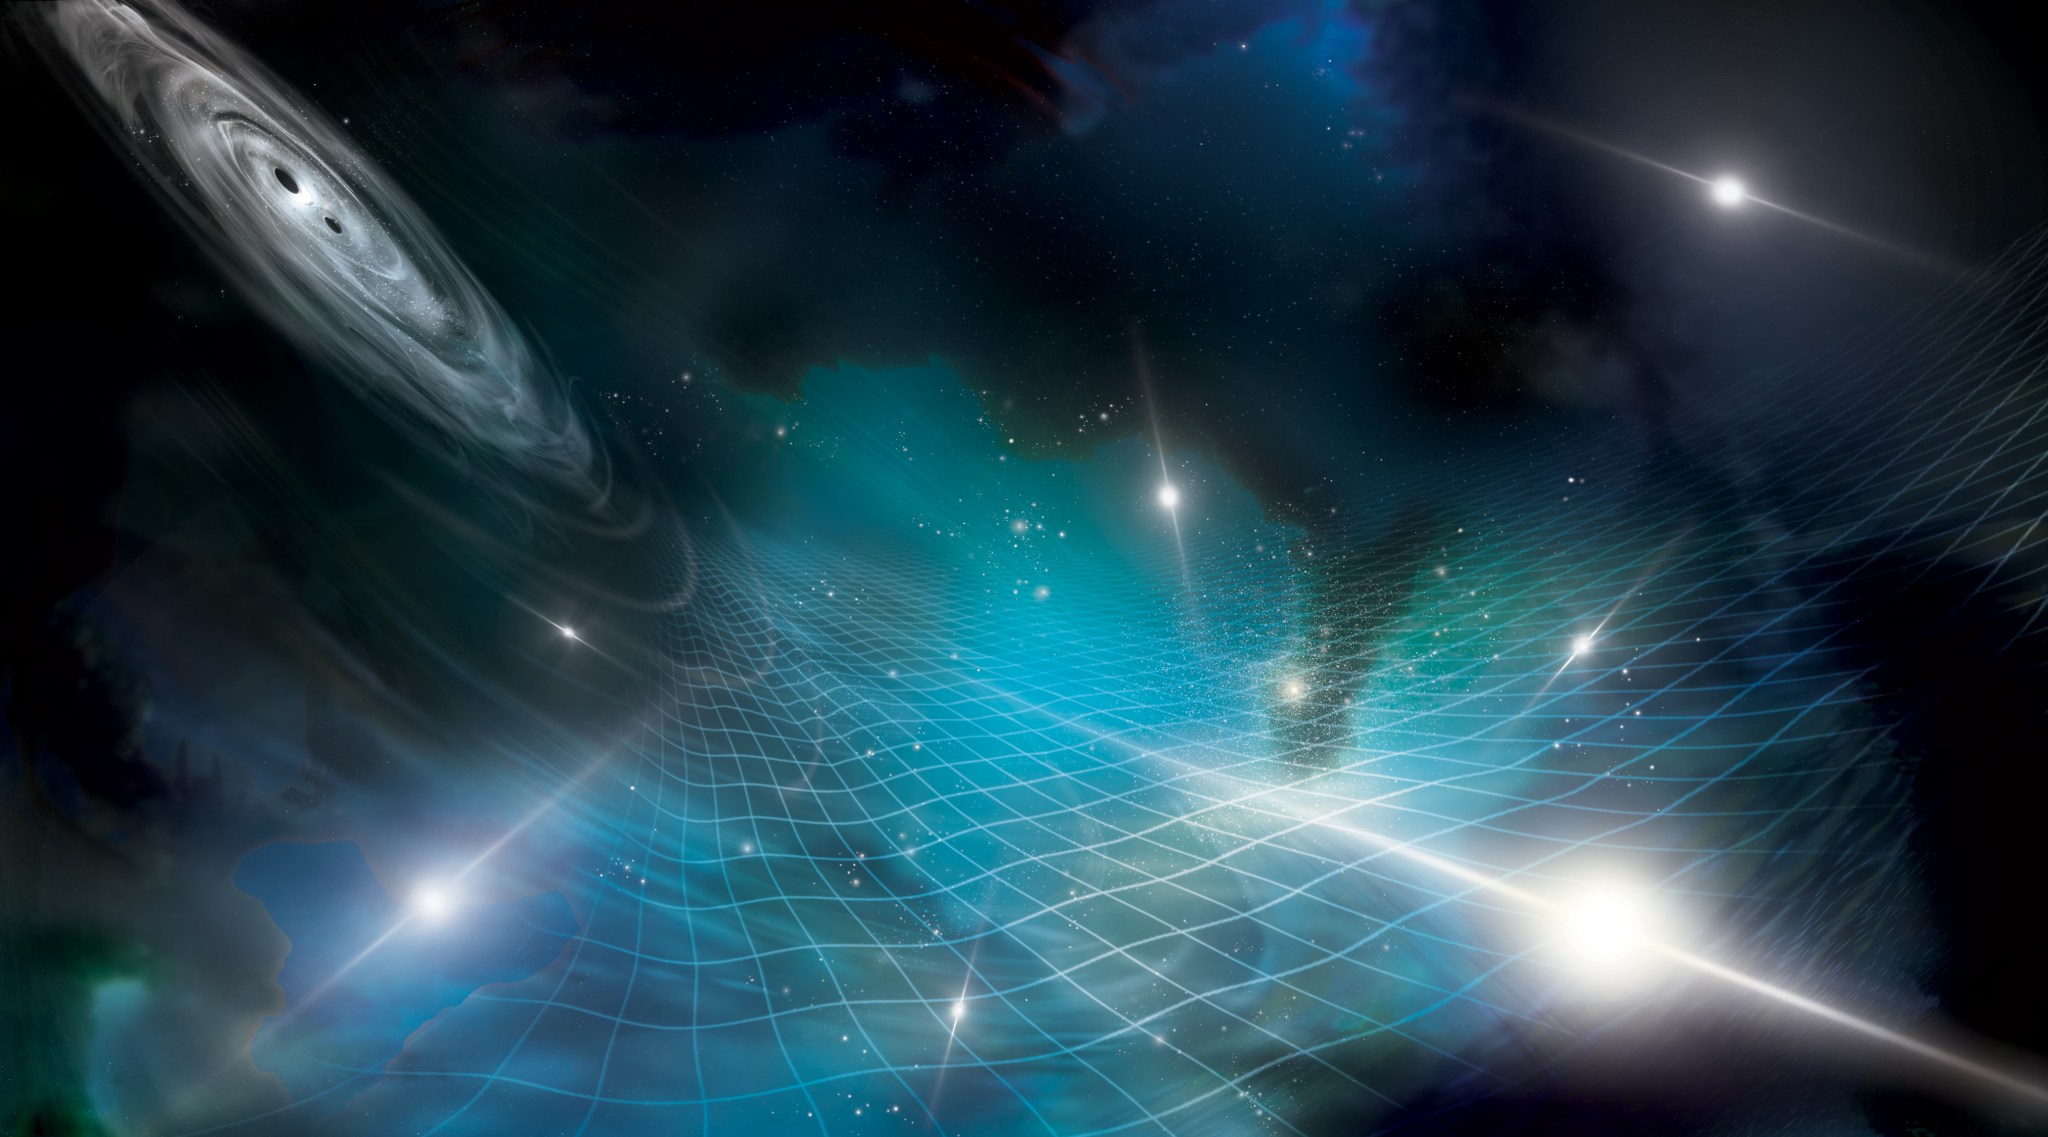 This artists concept shows stars, black holes, and nebula laid over a grid representing the fabric of space-time.